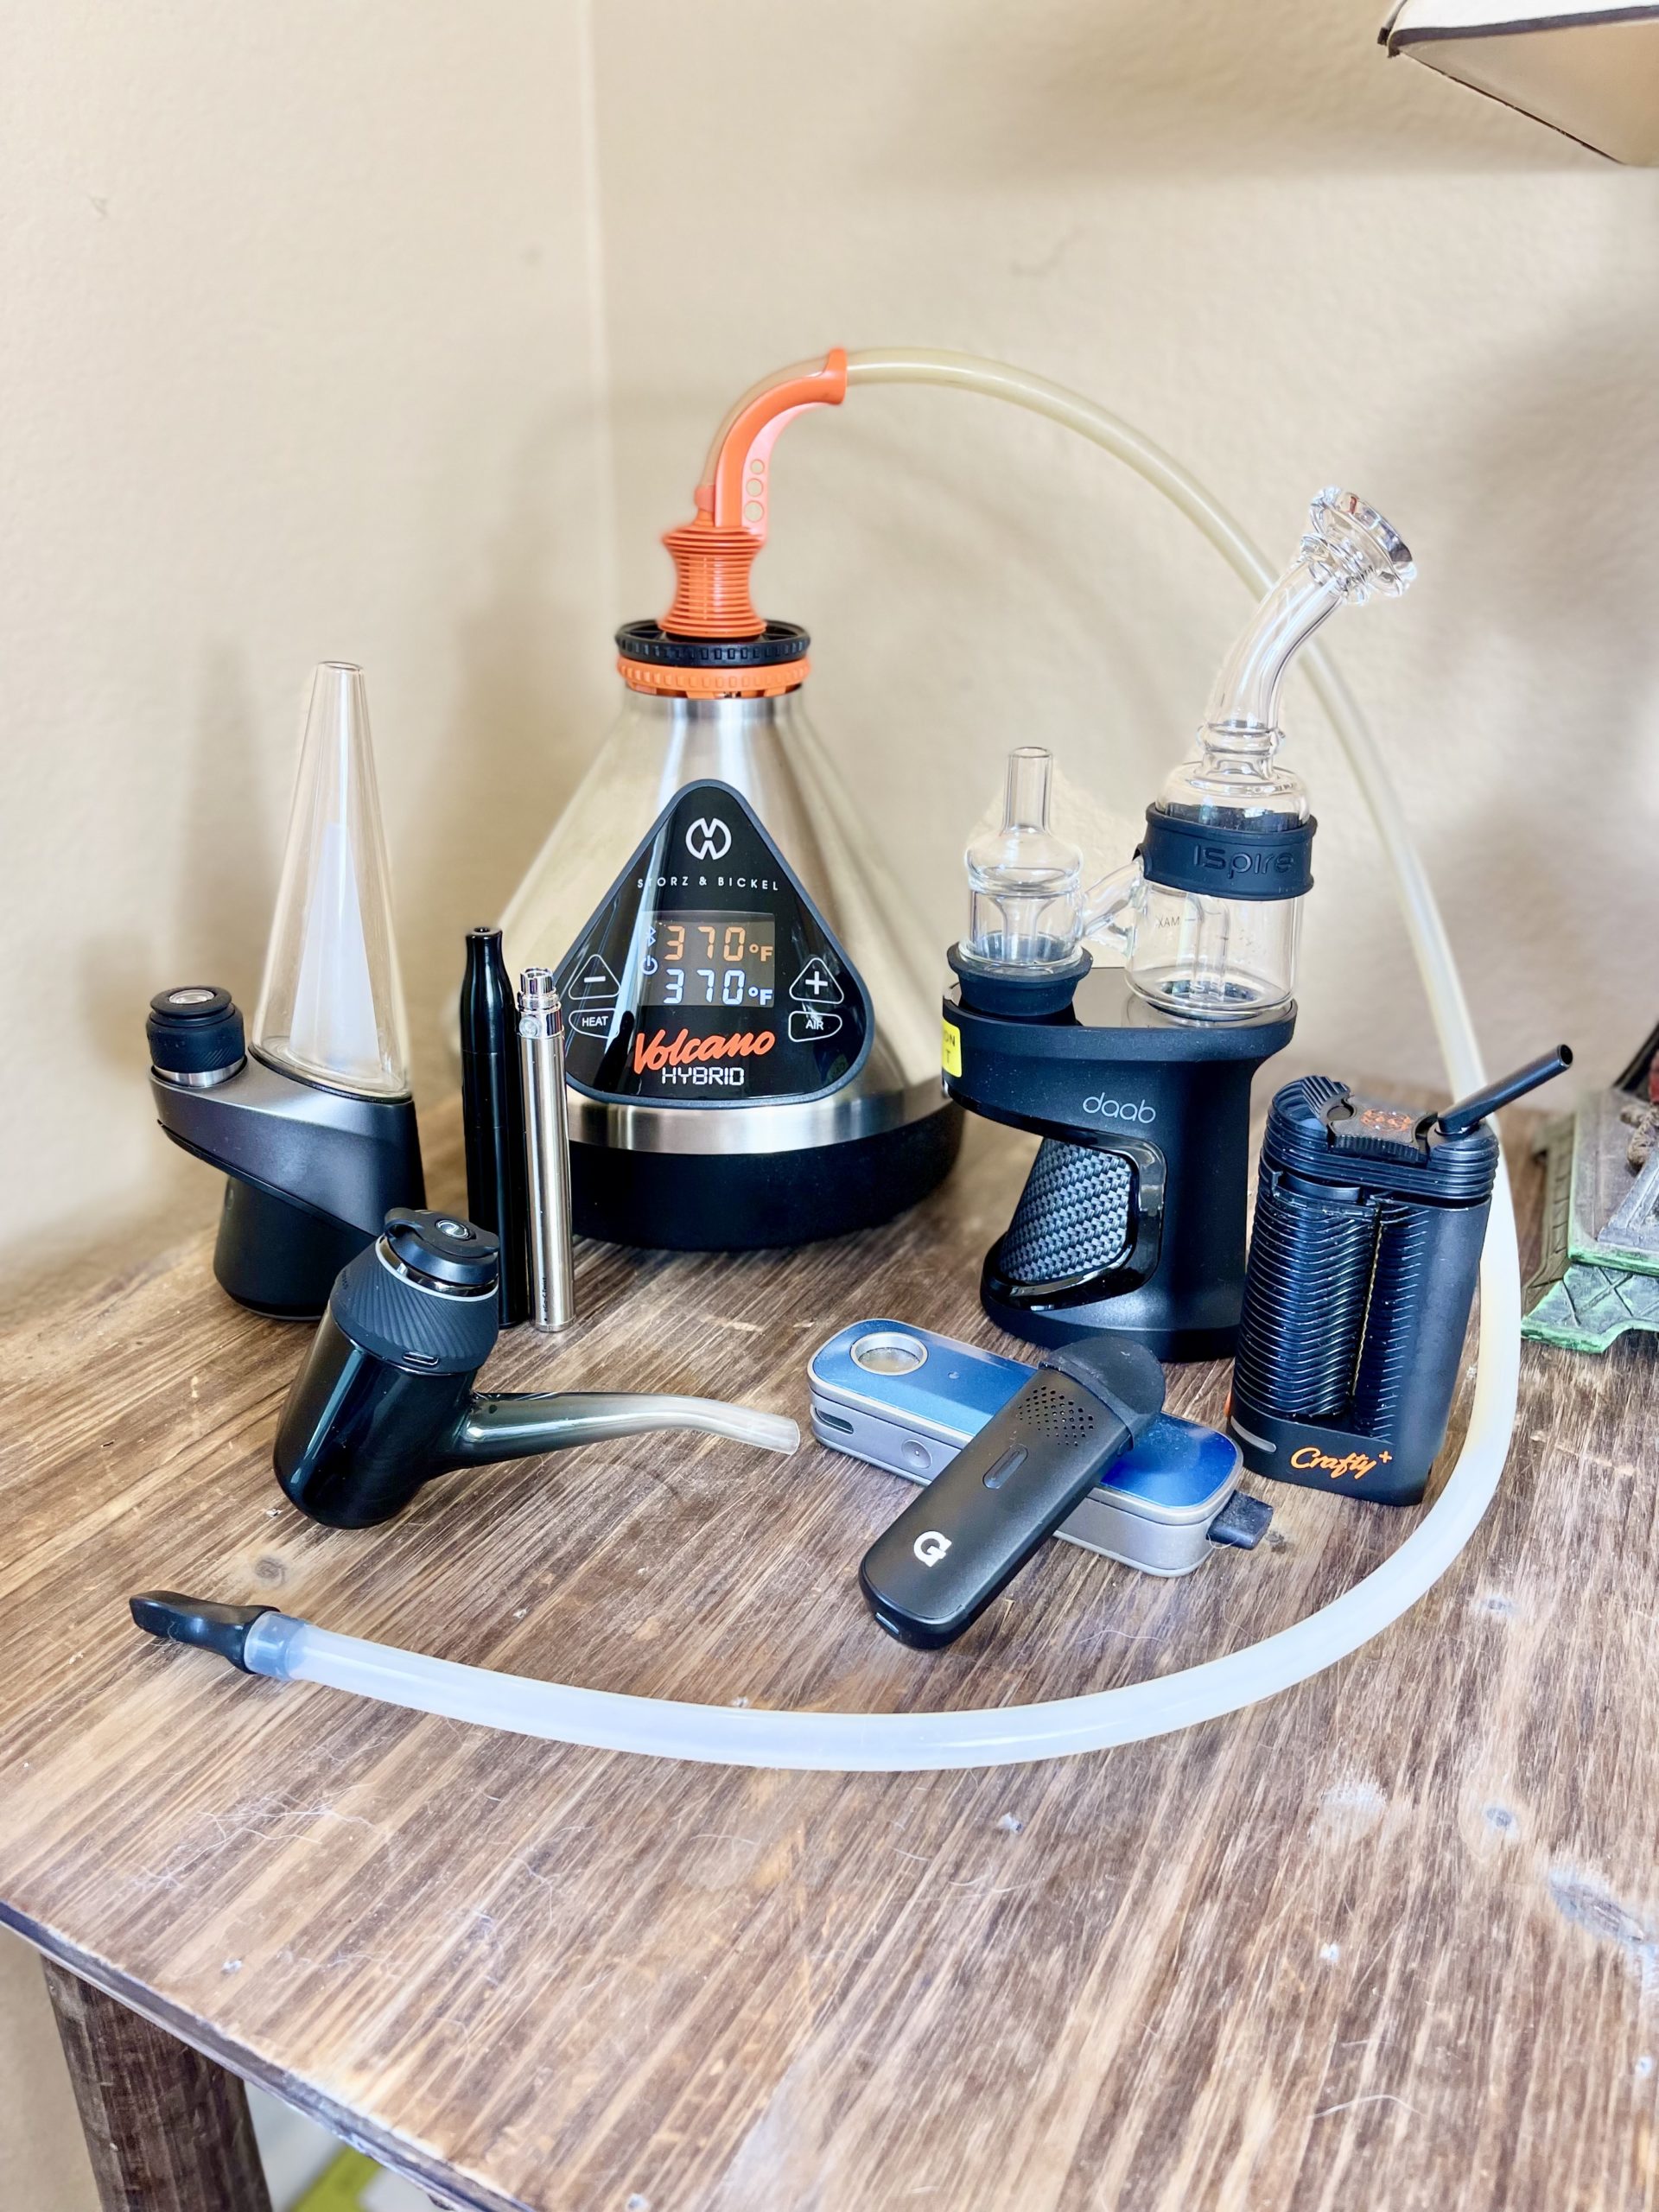 hire Rafflesia Arnoldi Archeological Herb Vaporizers Vs. Concentrate Vaporizers | How to Choose